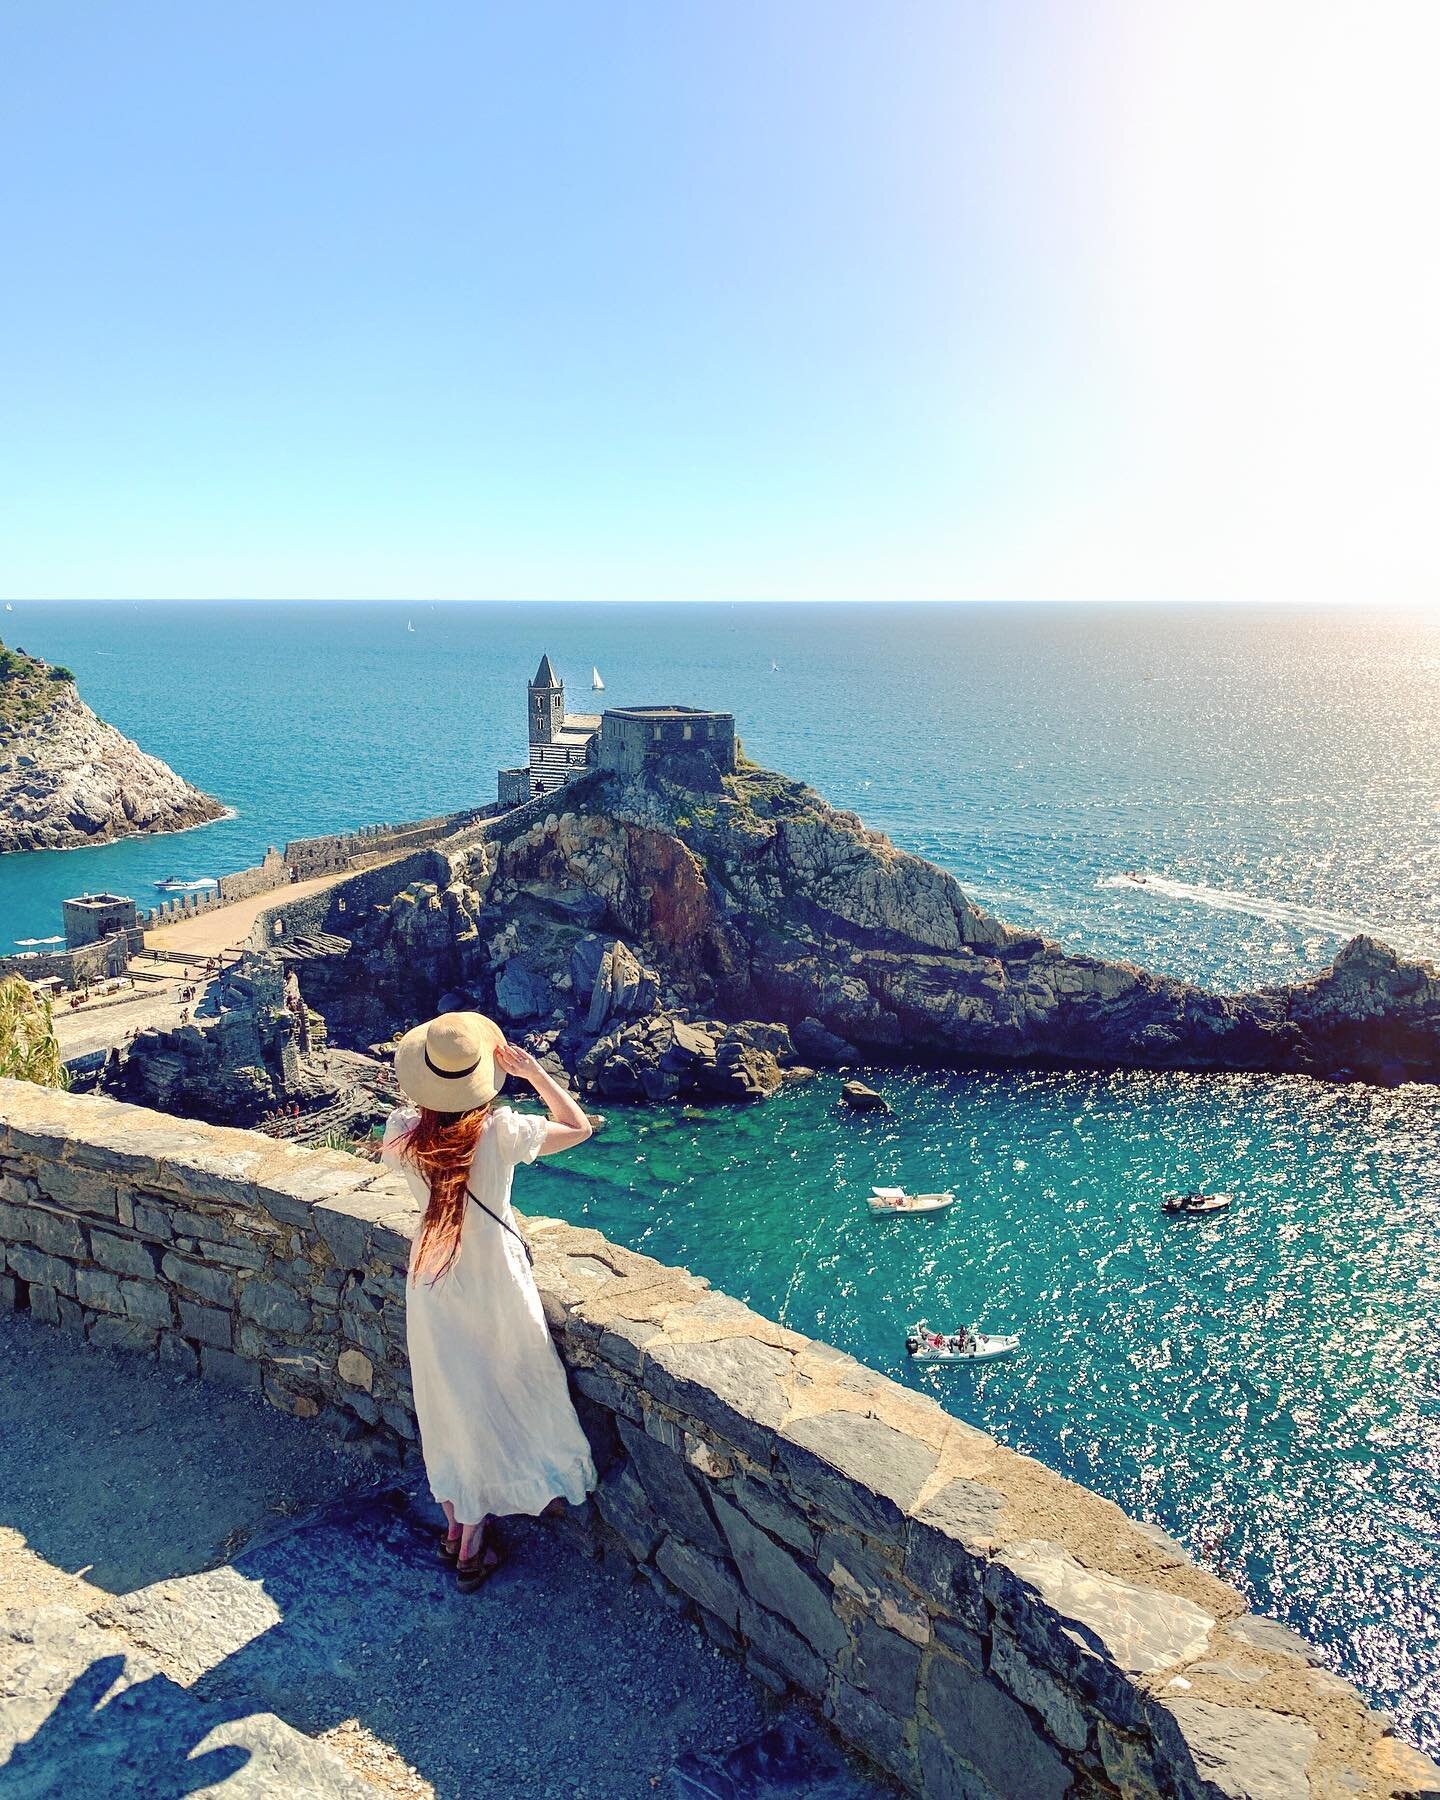 Would you believe this church, in its somewhat precarious position, on top of a rock jutting out to sea, was built in the 13th century? It's kind of unimaginable, but it&rsquo;s true 💙 This magical place is in Porto Venere - a stunning, little colou